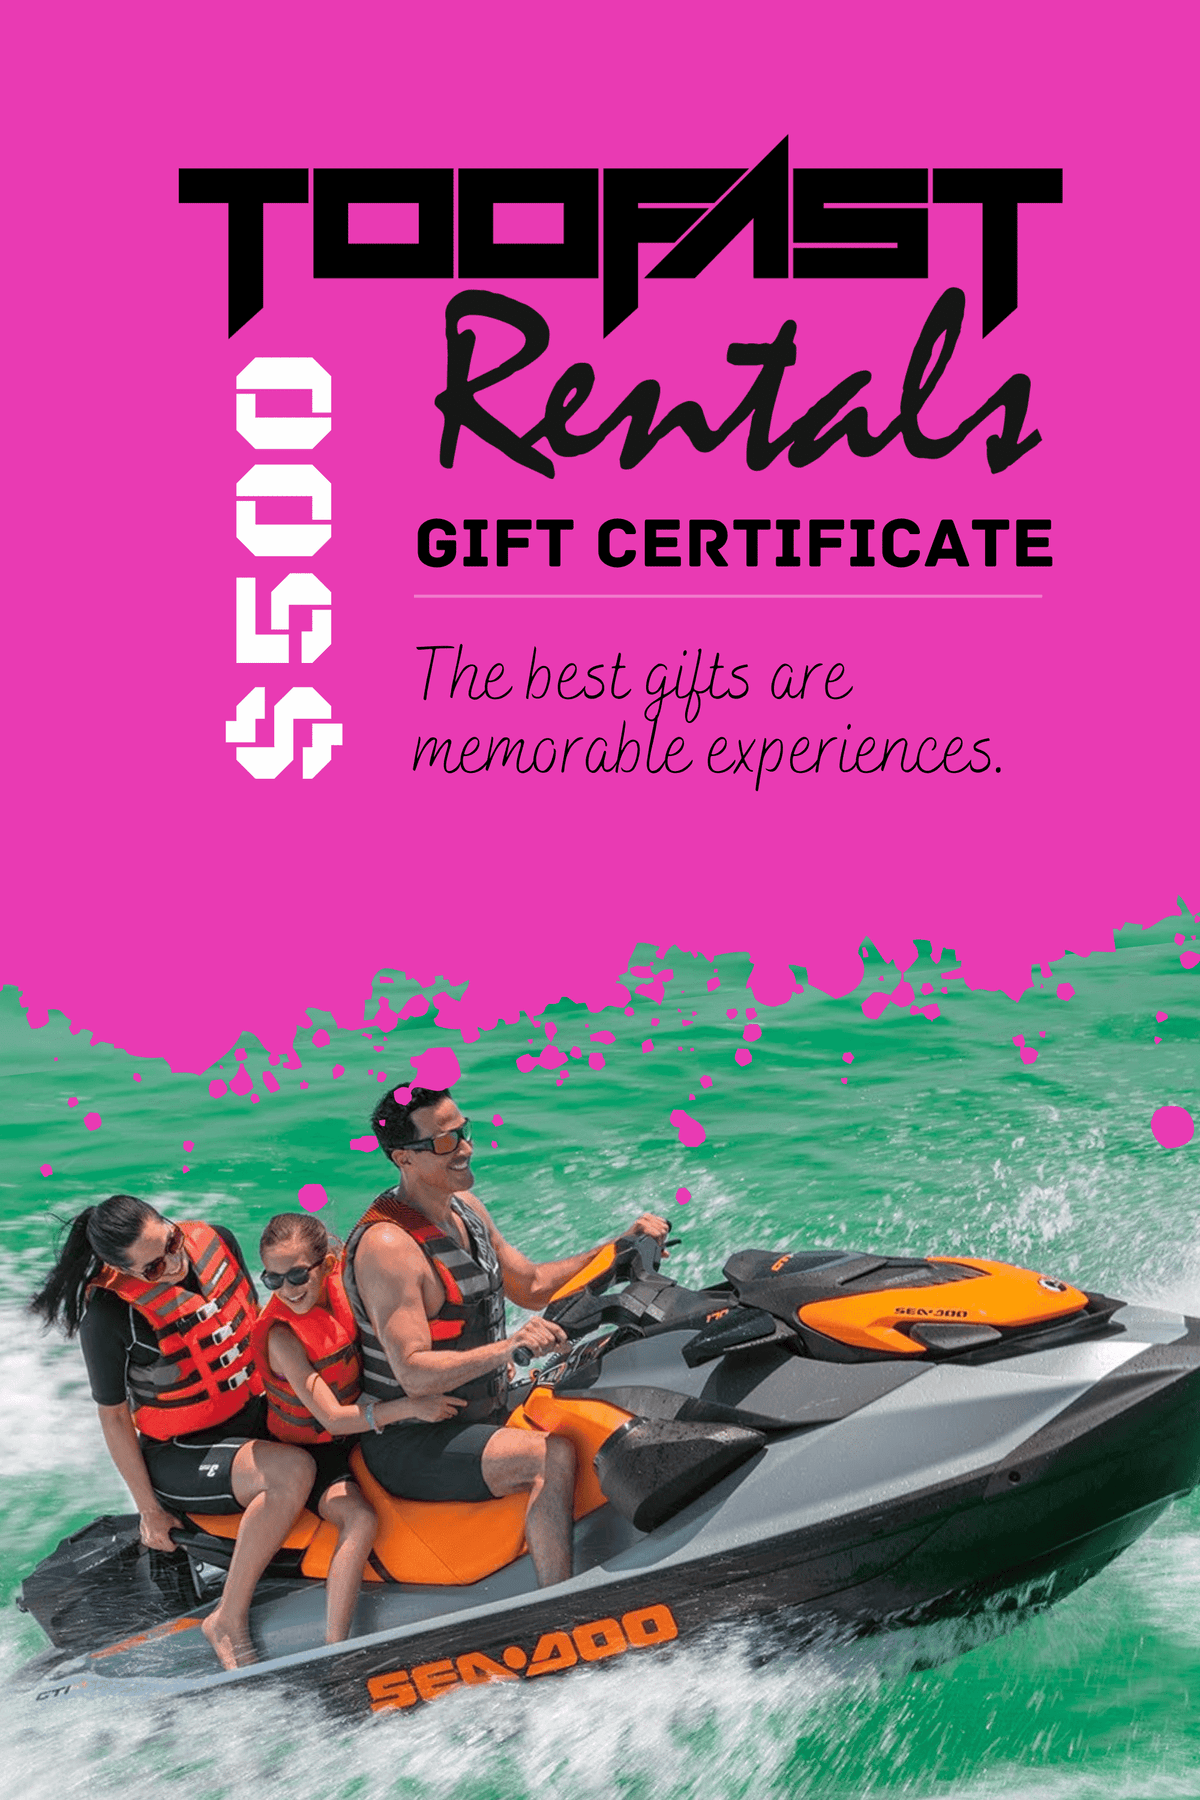 Too Fast Rentals Gift Certificates - Too Fast Rentals